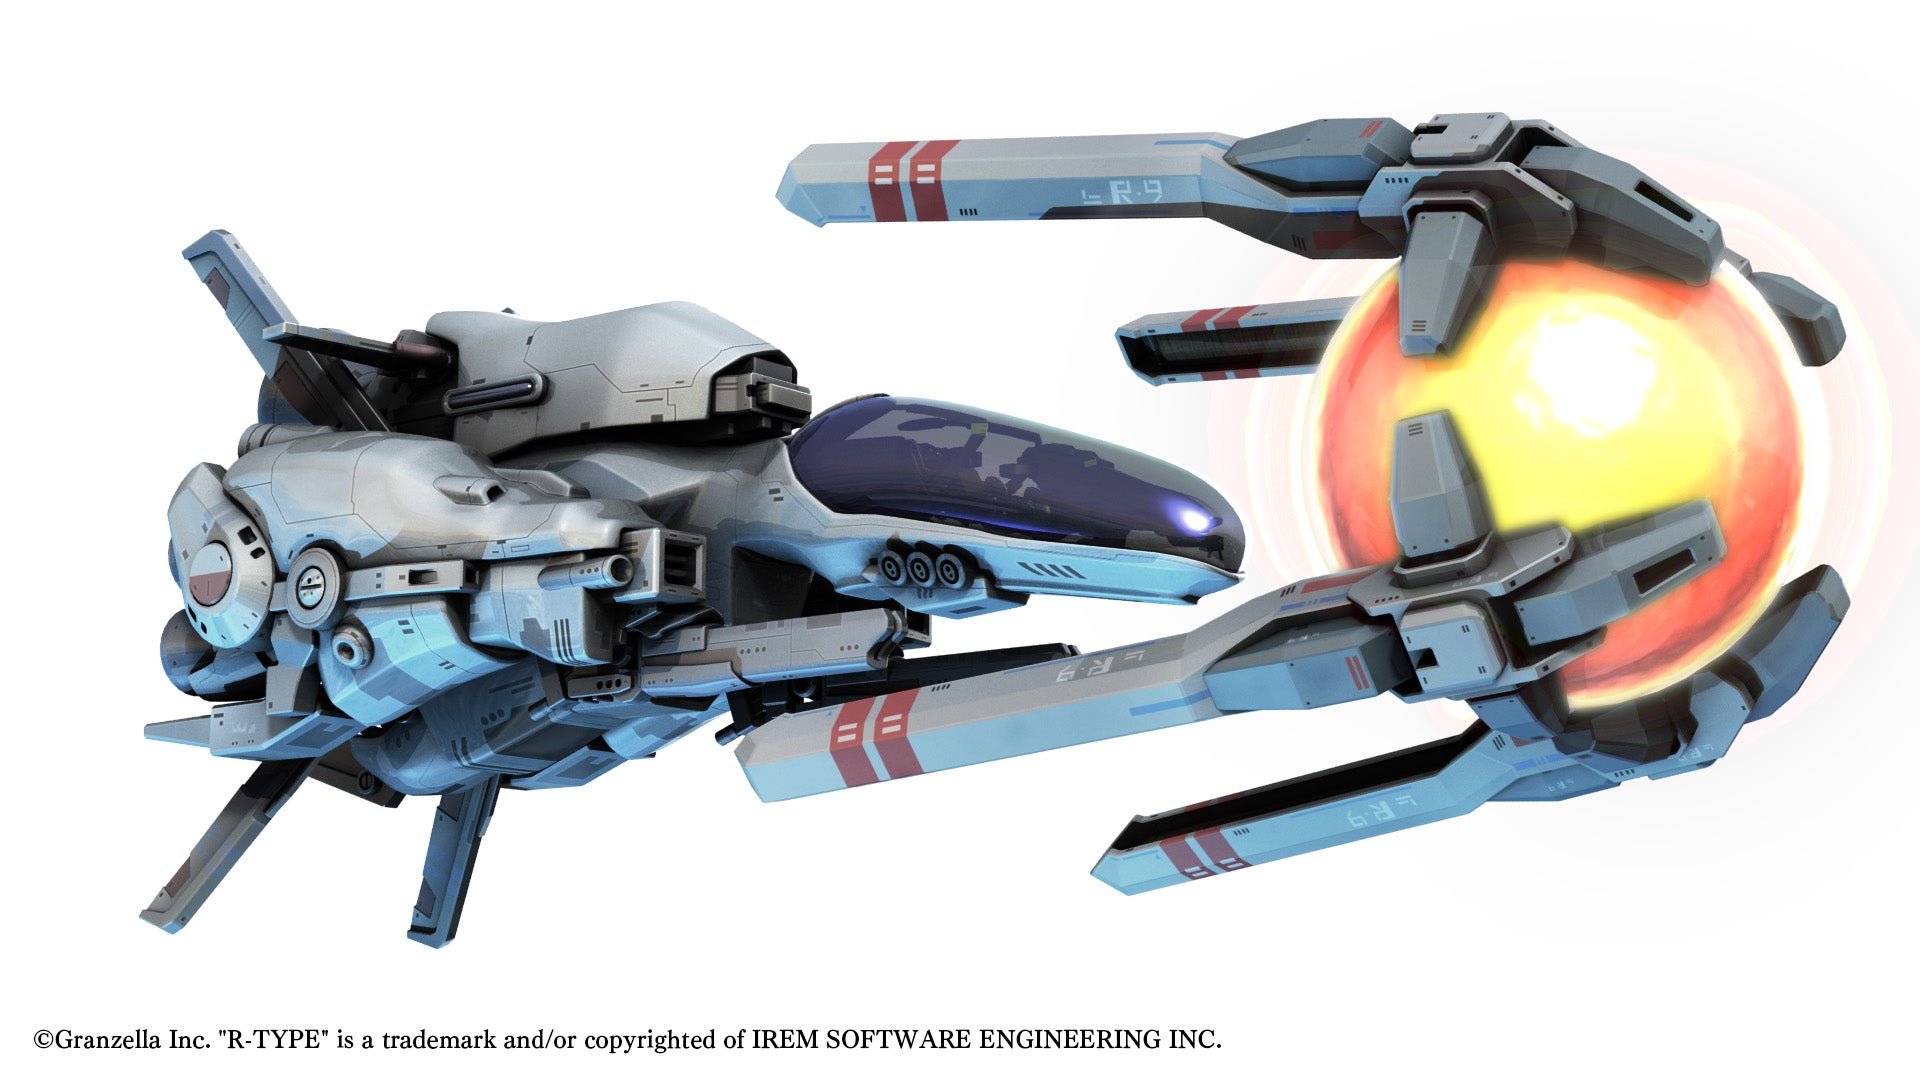 Image for This Kickstarter campaign is trying to revive the classic shmup R-Type series